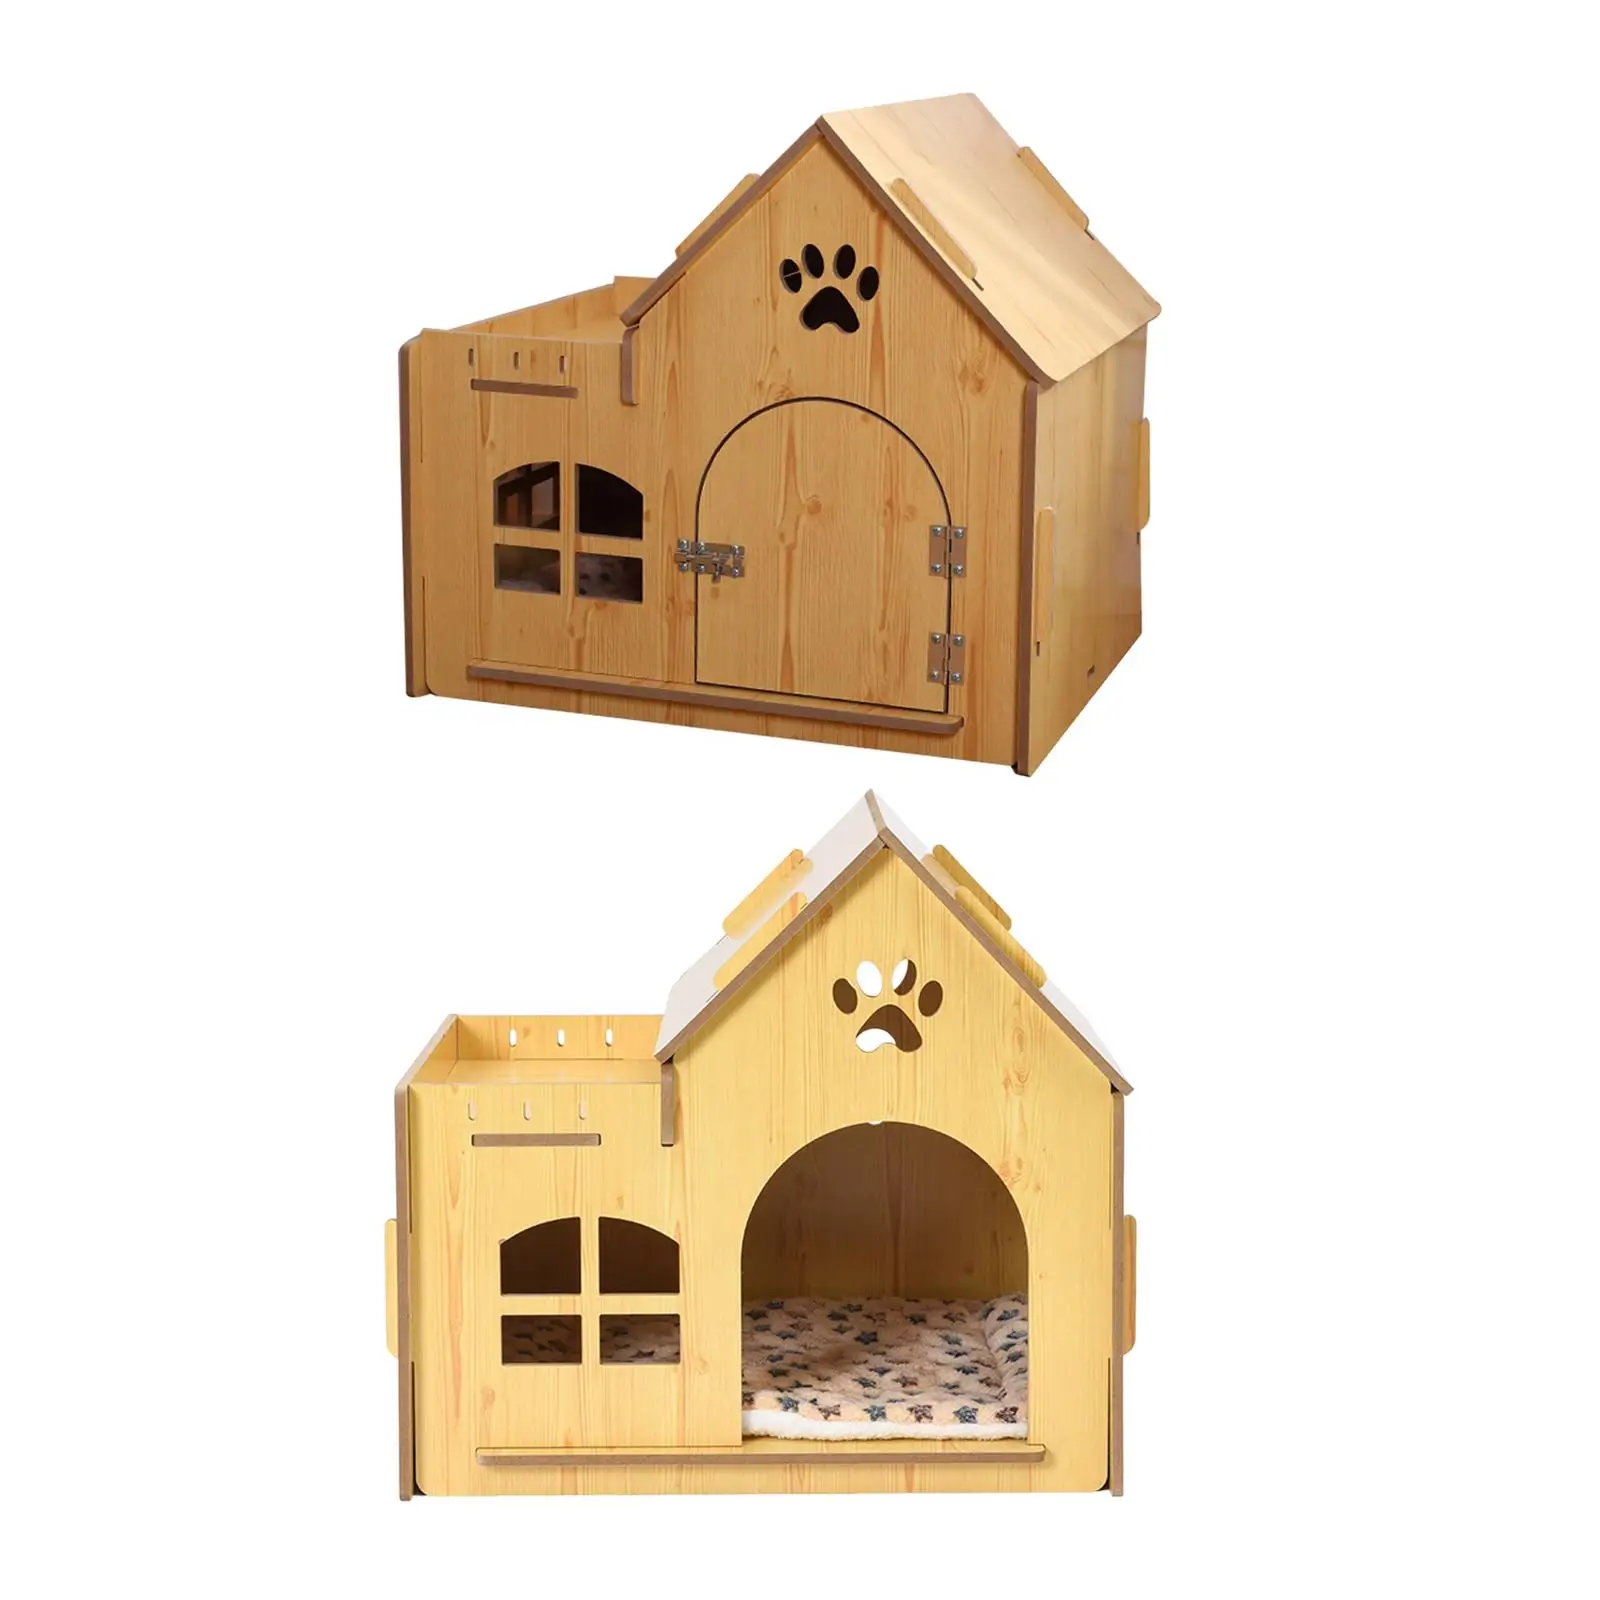 Wooden Pet Kitty House Cat Shelter with Windows Outdoor and Indoor Windproof